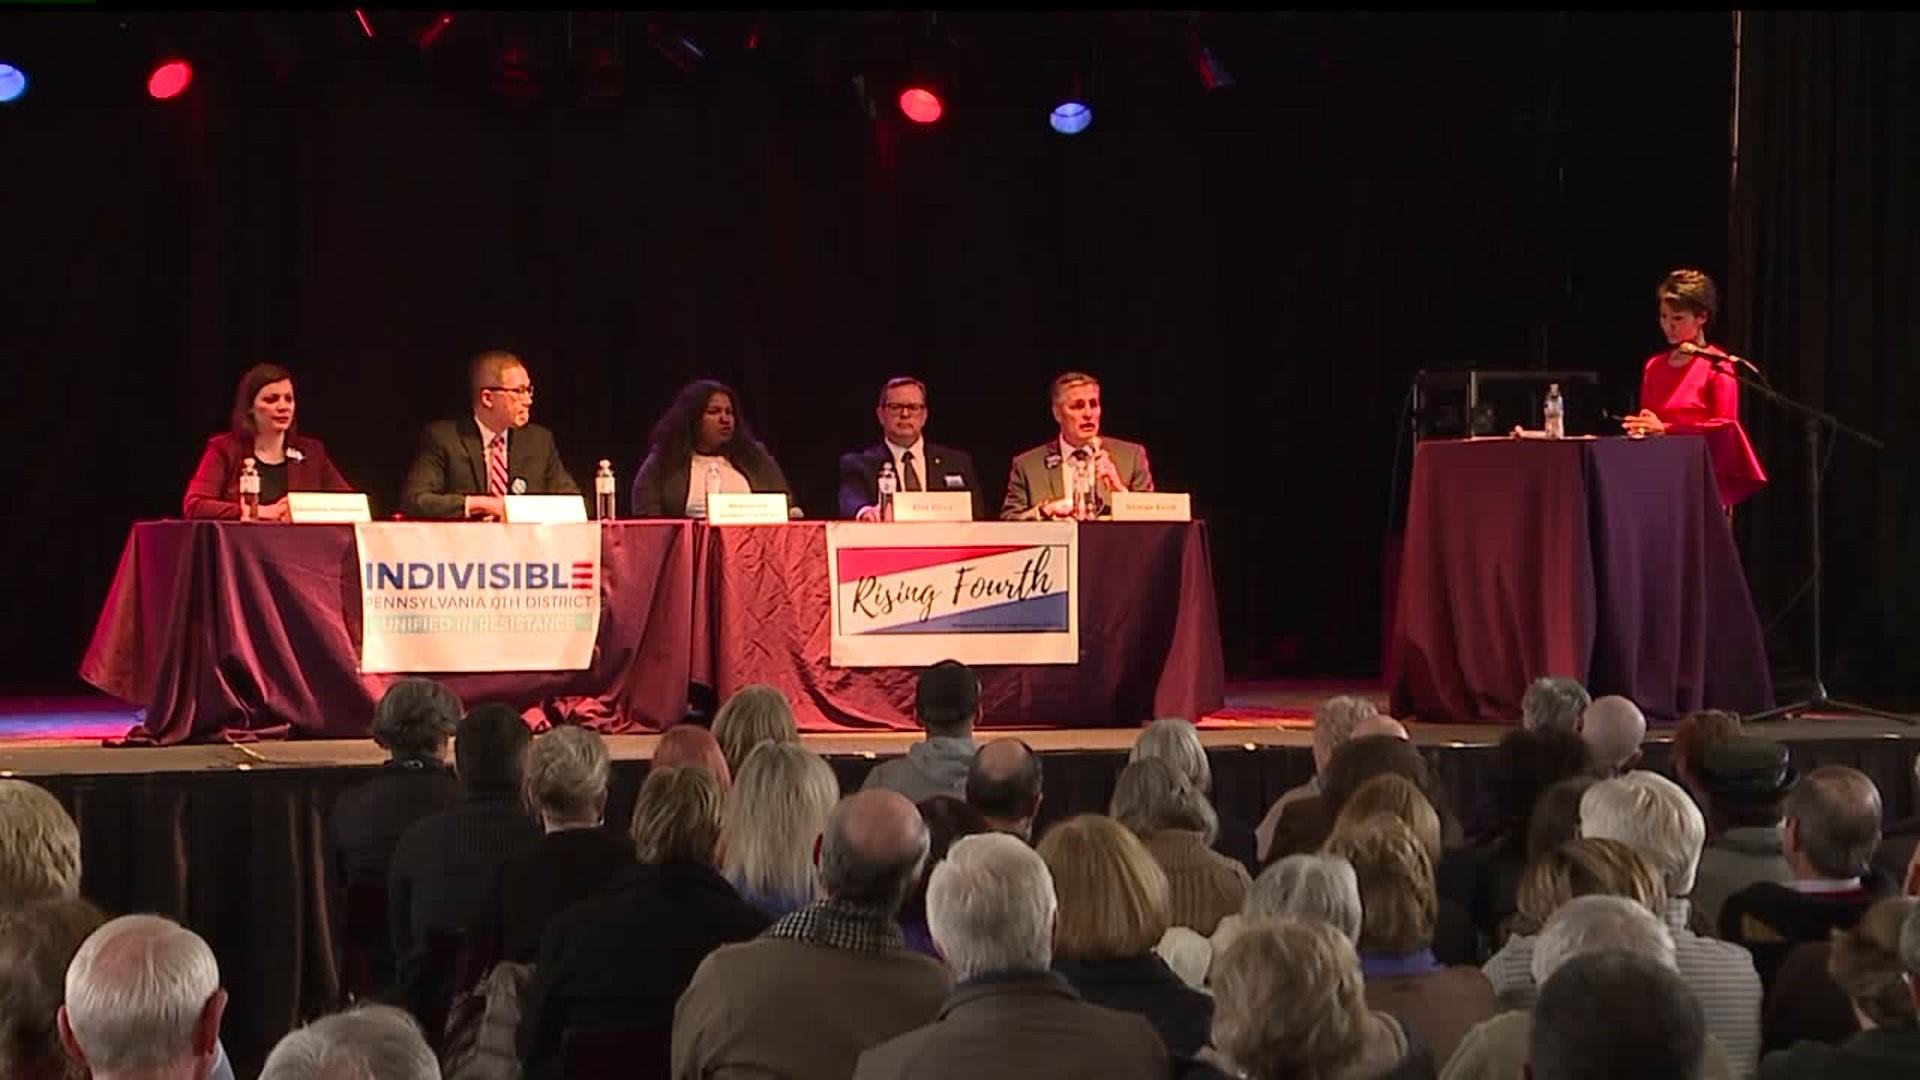 Democratic candidates vying to challenge Republican Rep. Scott Perry hold debate in Harrisburg